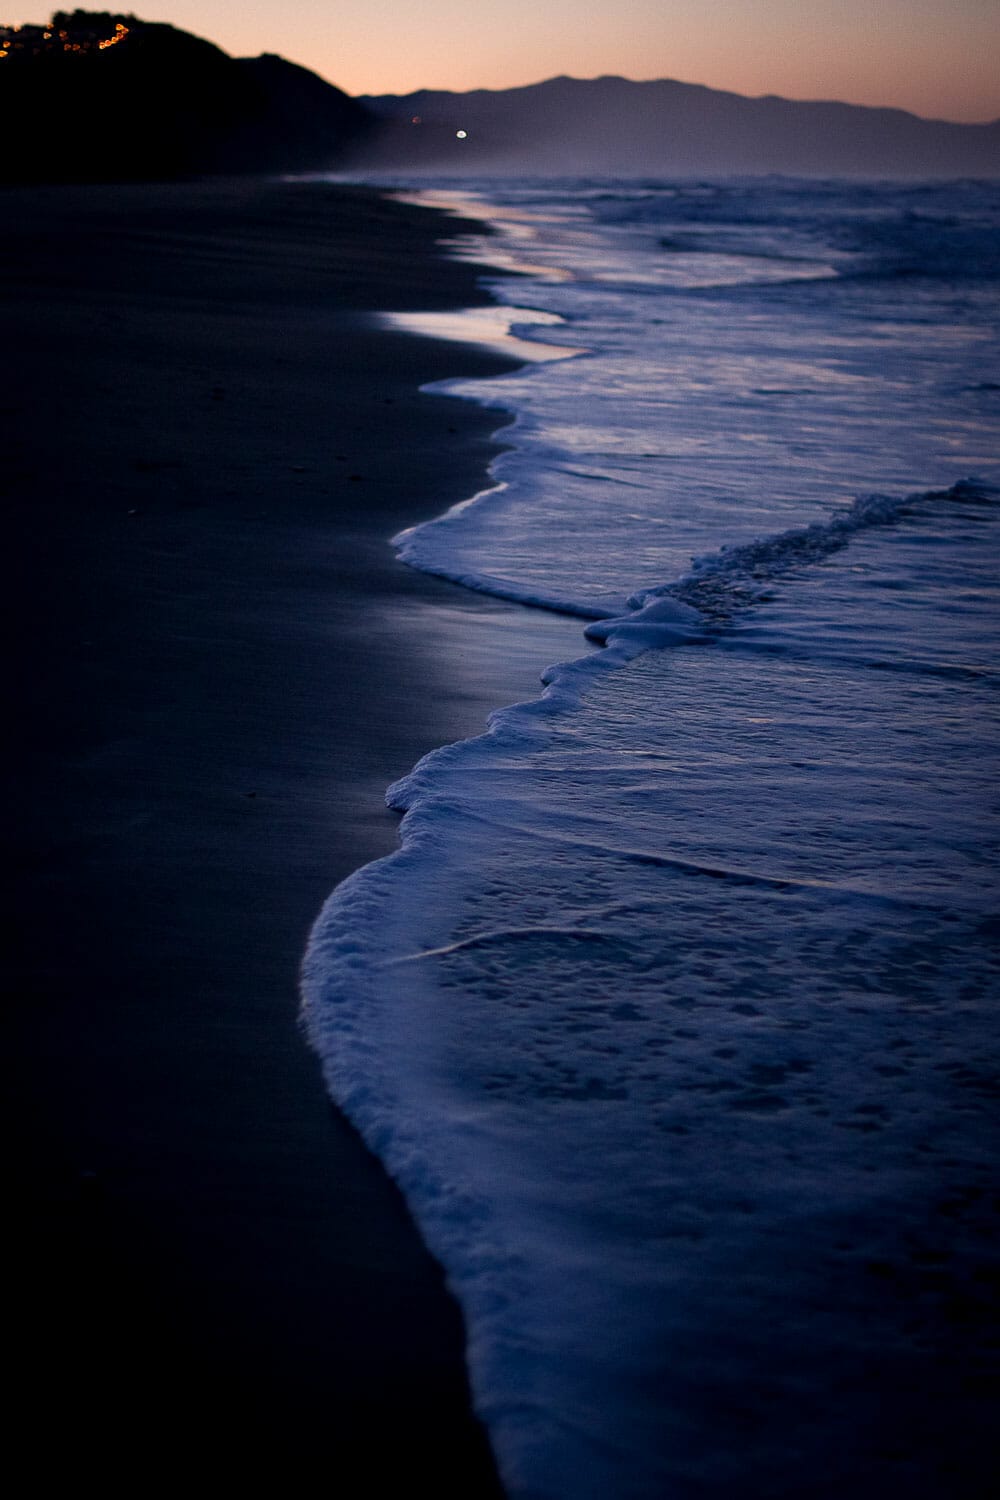 Twilight at the beach with gentle waves lapping the shore.